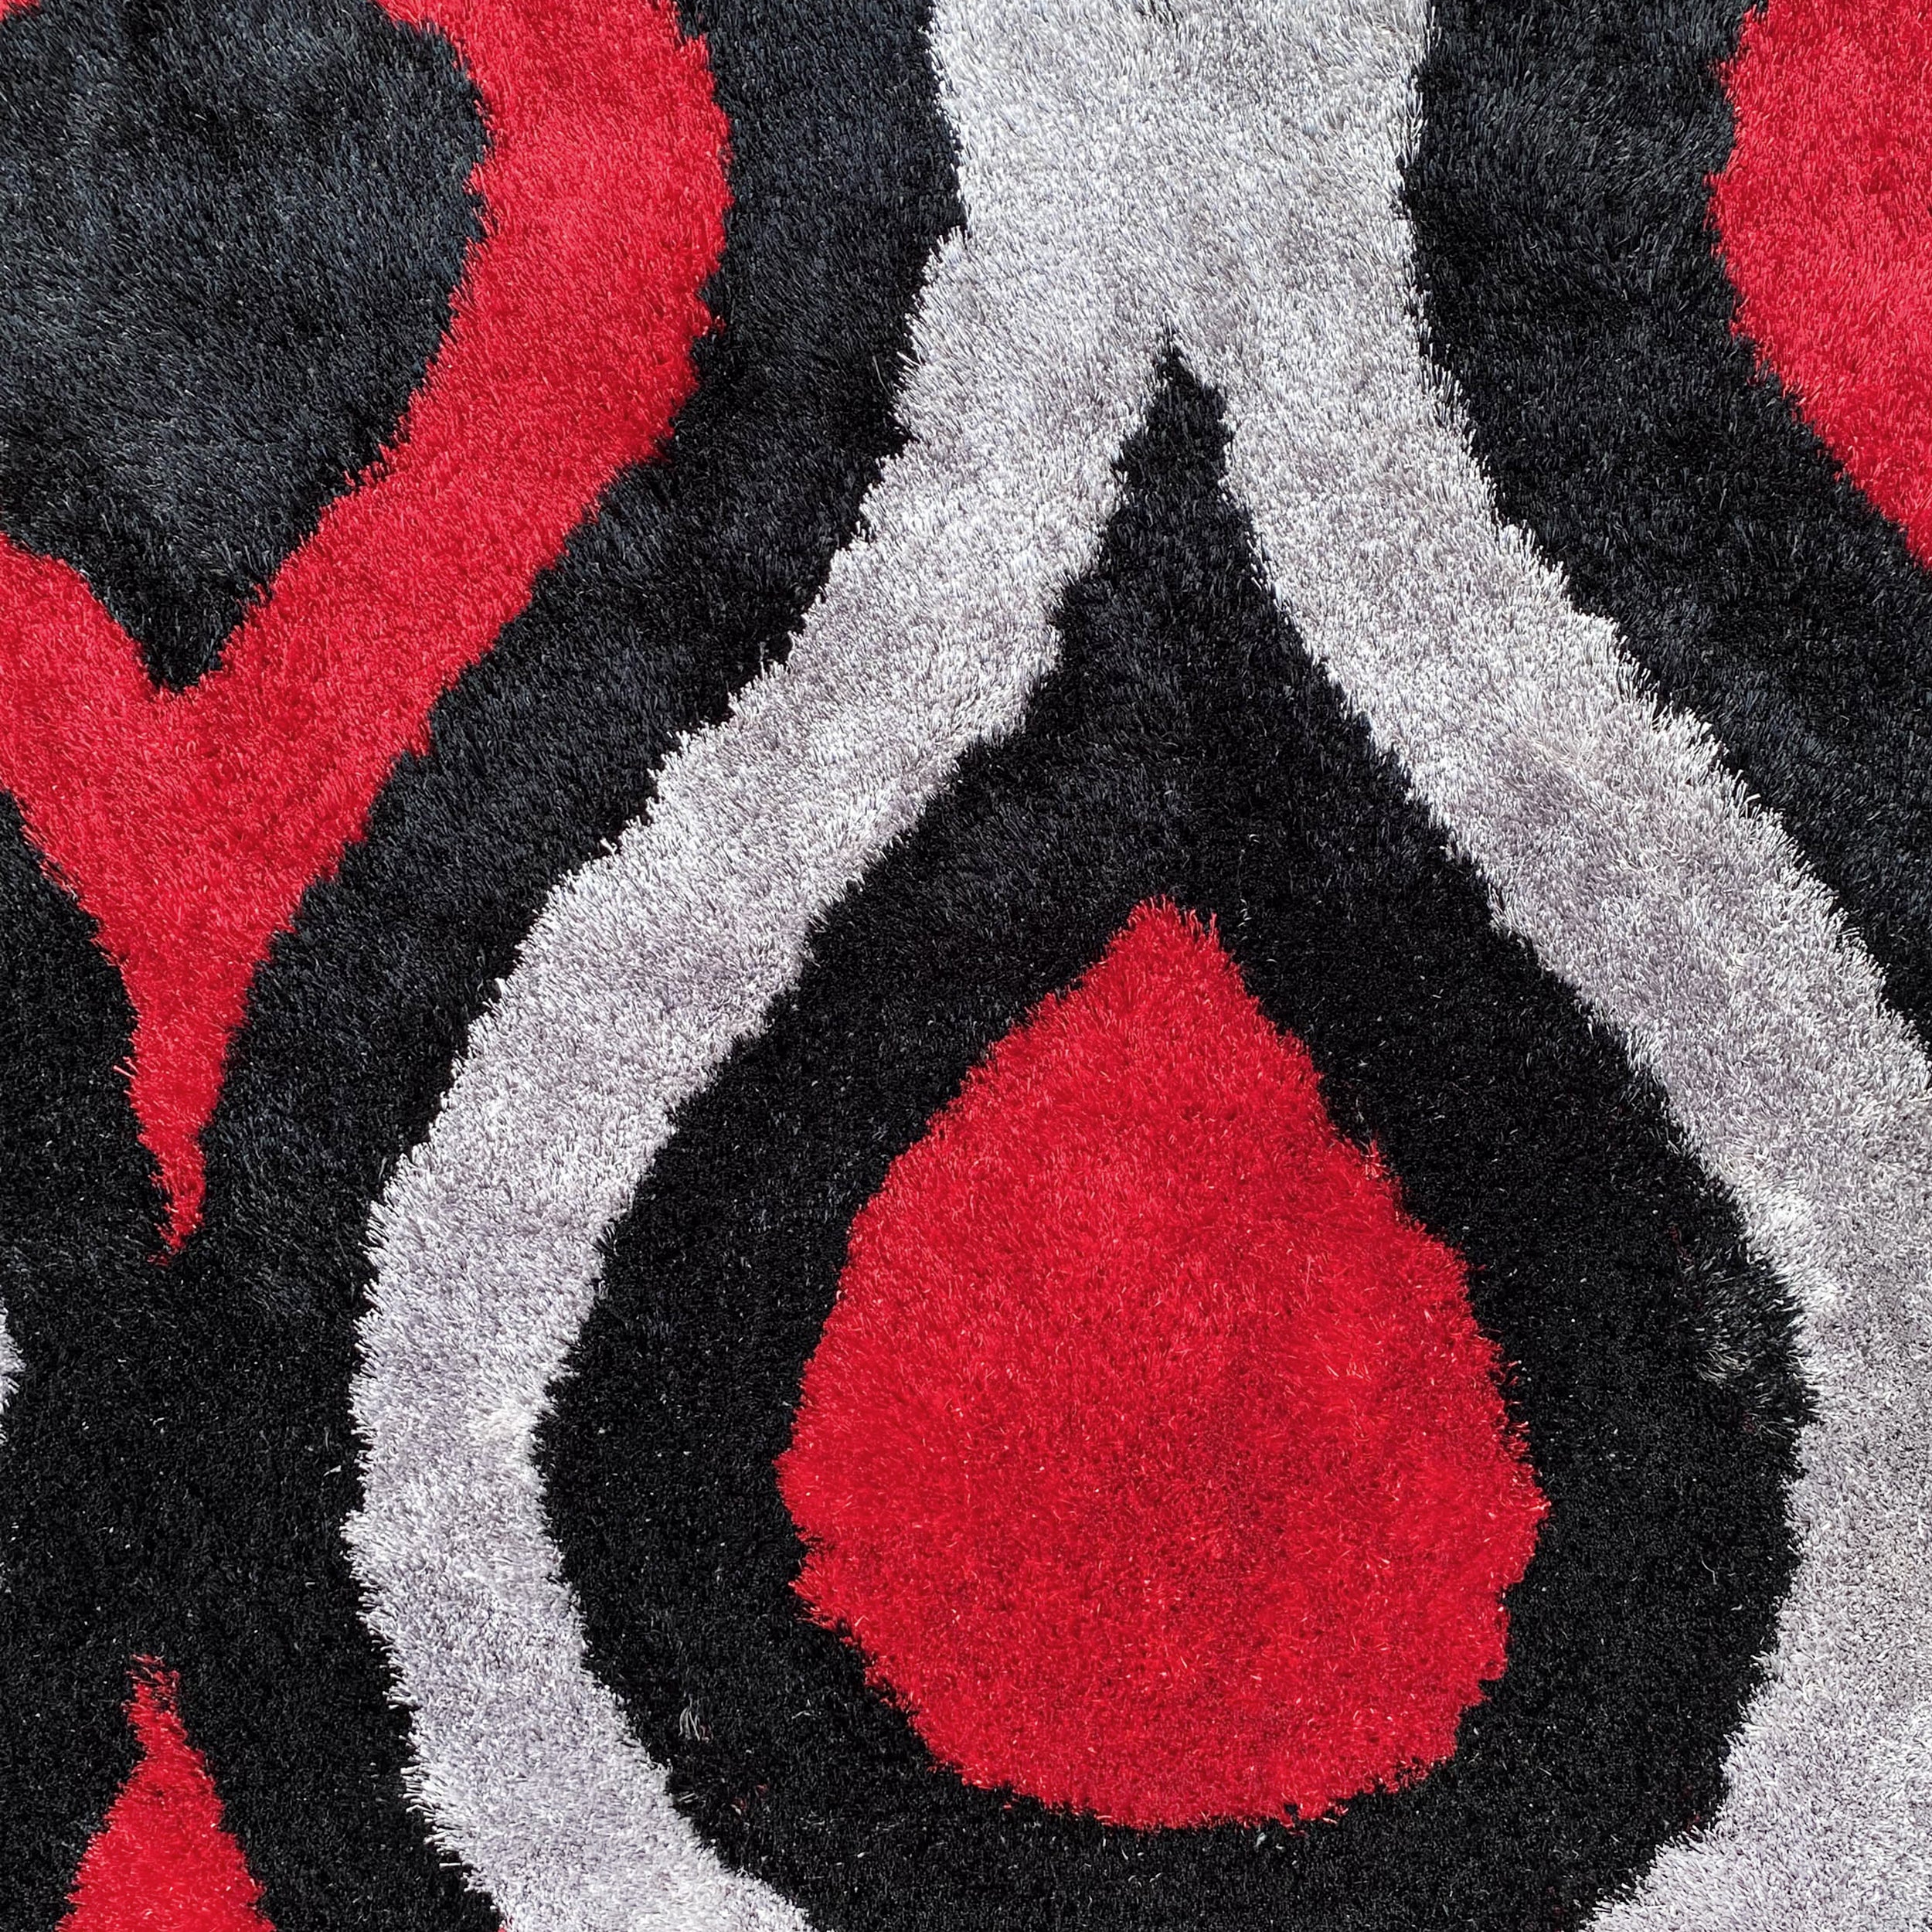 Optima Bel Air Red And Black Shag Area Rug